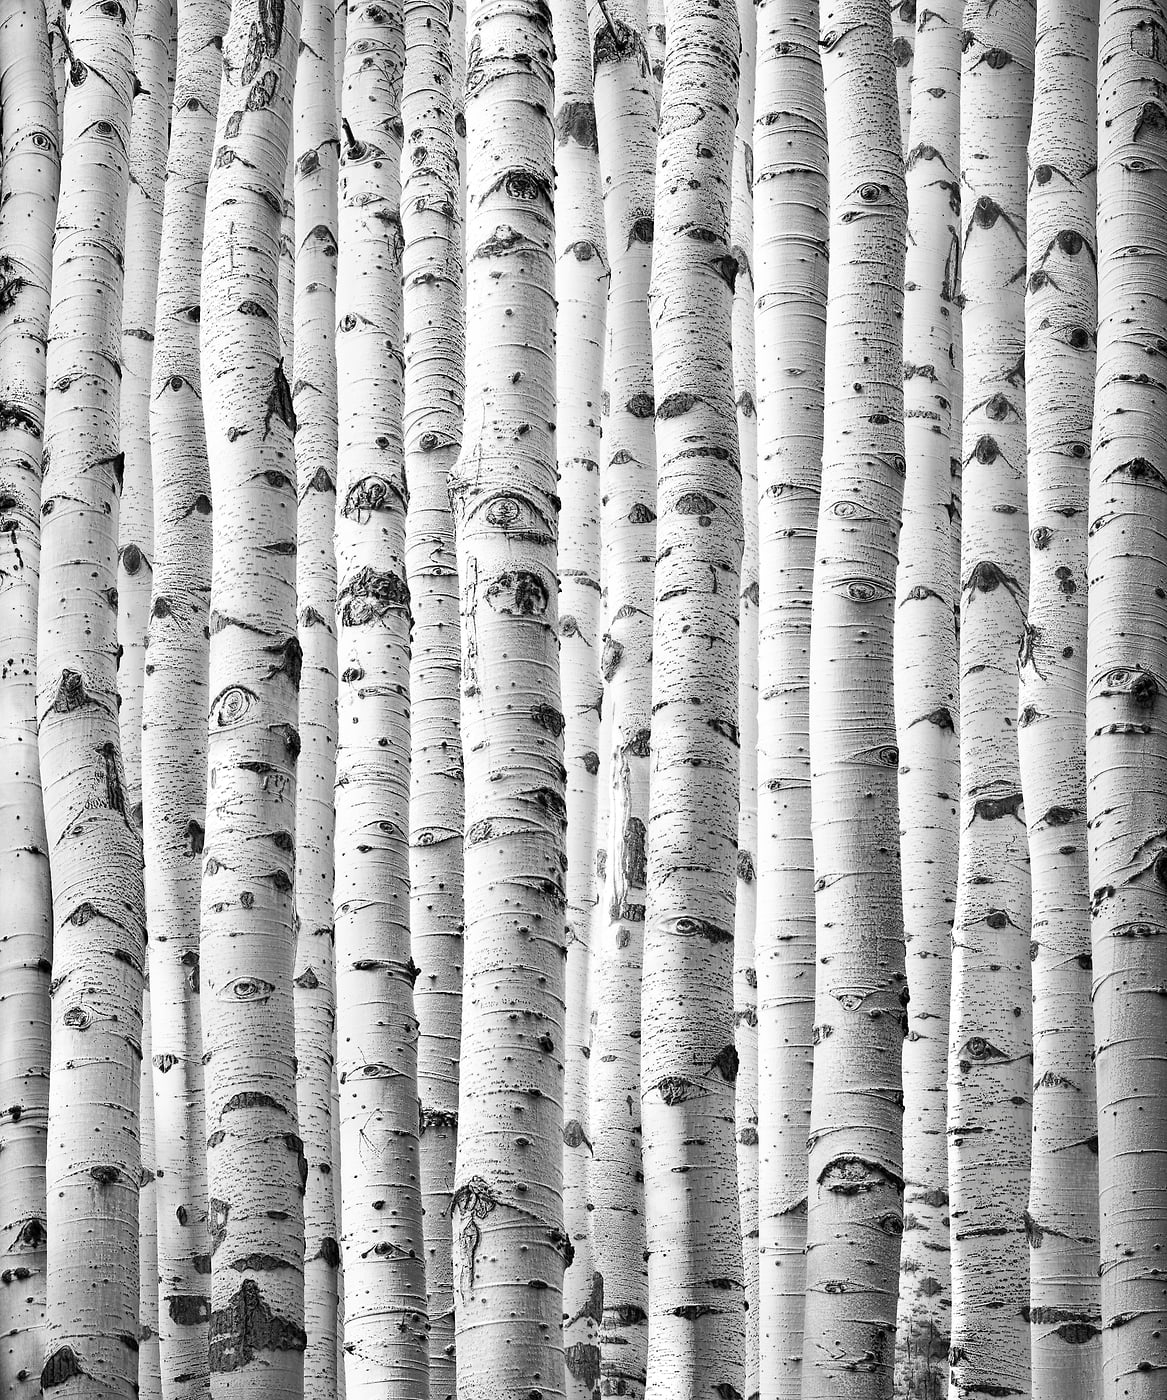 270 megapixels! A very high resolution, large-format VAST photo print of aspen trees; black and white abstract nature photograph created by Nick Pedersen